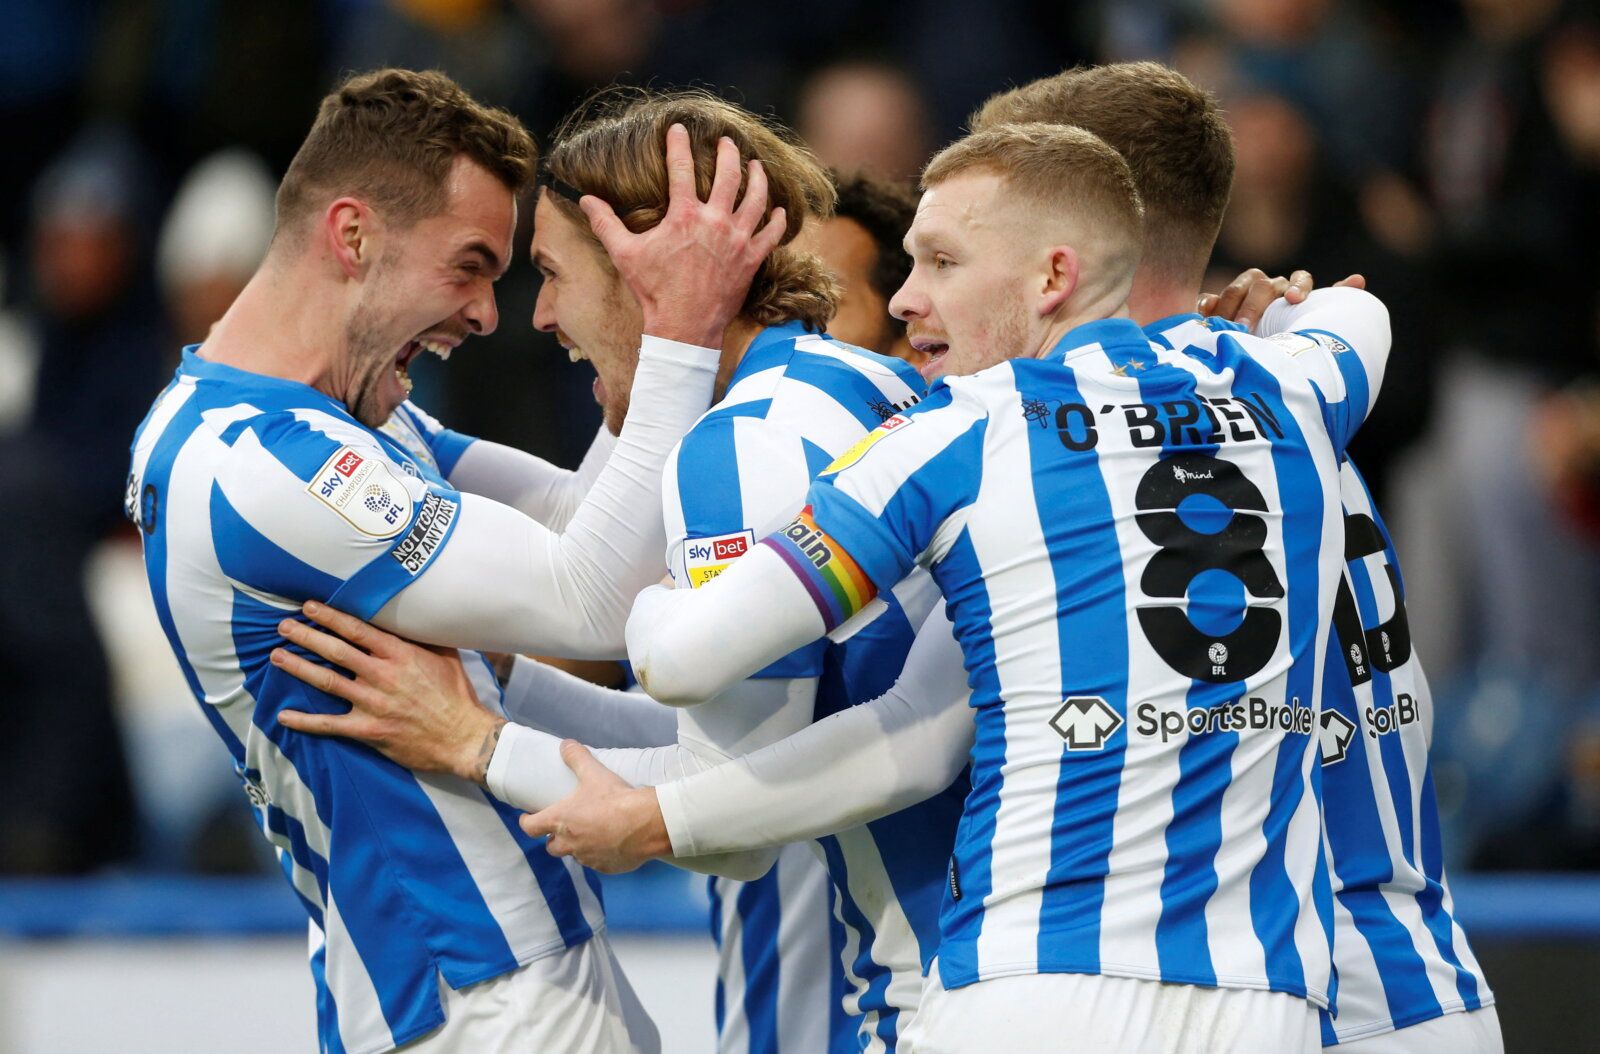 Soccer Football - Championship - Huddersfield Town v Coventry City - John Smith's Stadium, Huddersfield, Britain - December 11, 2021 Huddersfield Town's Danny Ward celebrates scoring their first goal  Action Images/Ed Sykes  EDITORIAL USE ONLY. No use with unauthorized audio, video, data, fixture lists, club/league logos or 